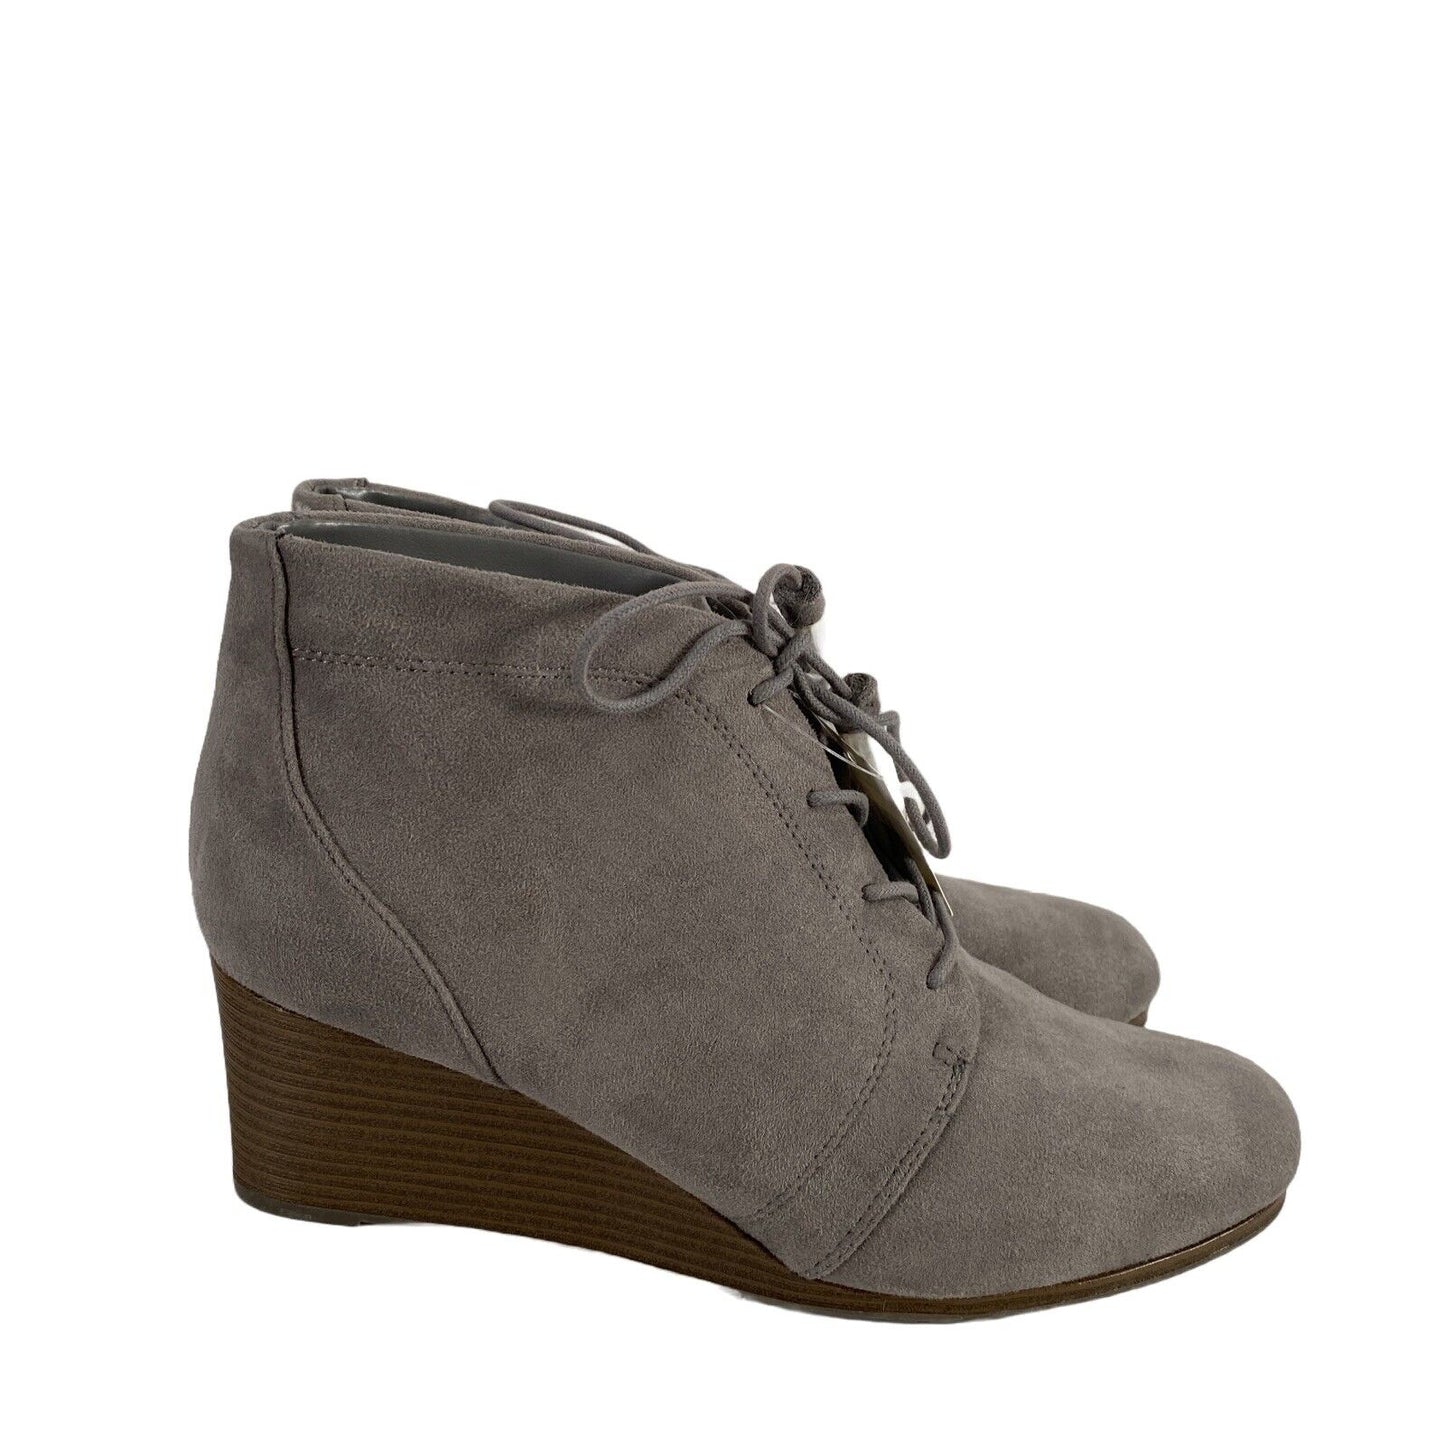 NEW Dr. Scholls Women's Gray Kennedy Lace Up Ankle Wedge Booties - 10